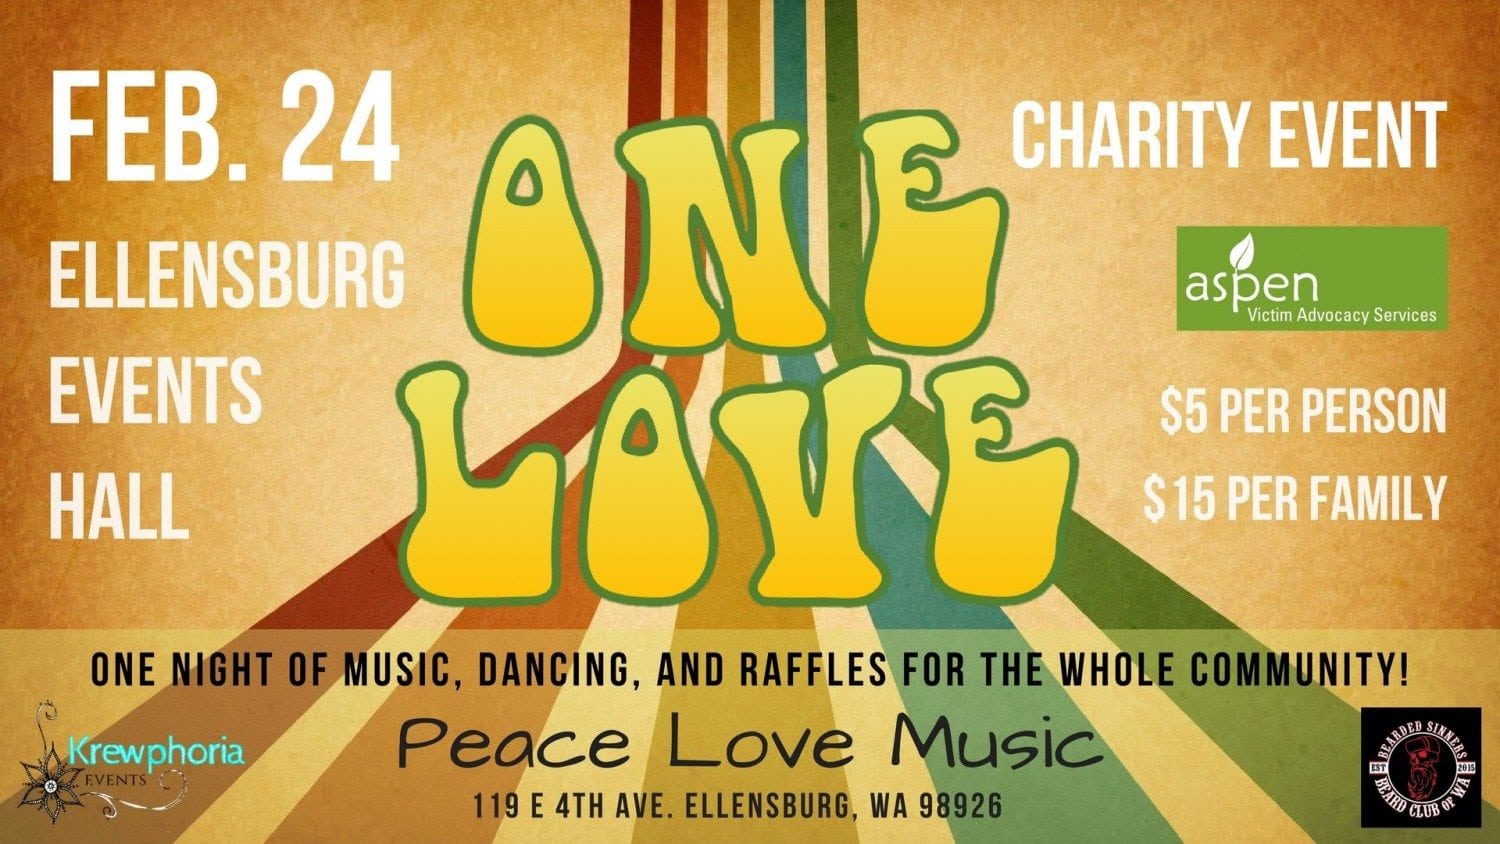 Celebrate One Love: A Charity Event in Ellensburg on 2/24